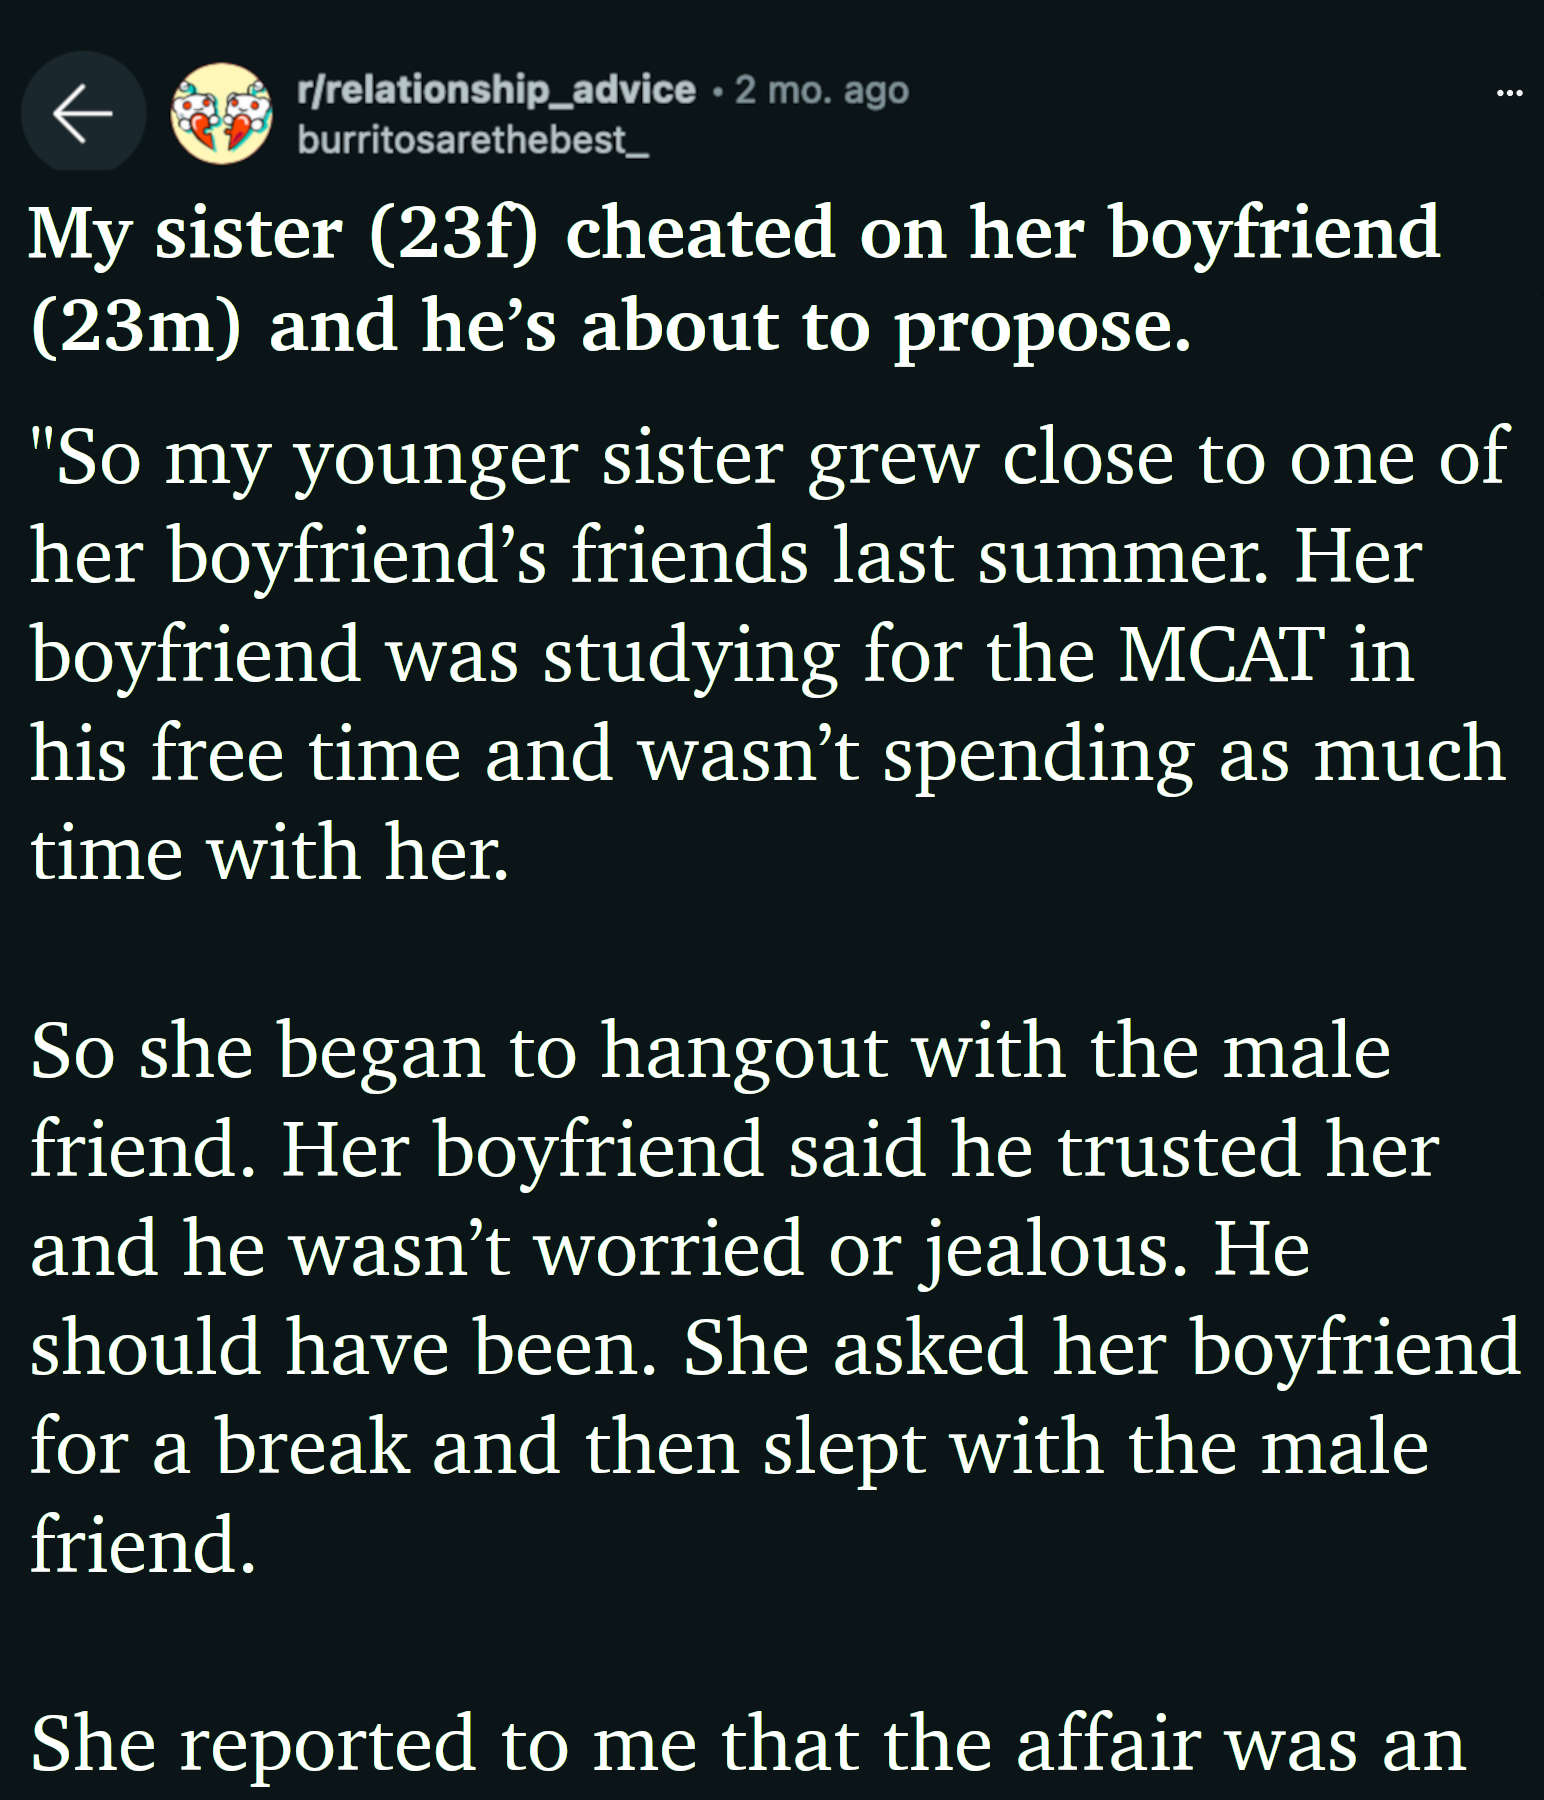 My sister (23f) cheated on her boyfriend (23m) and he’s about to propose